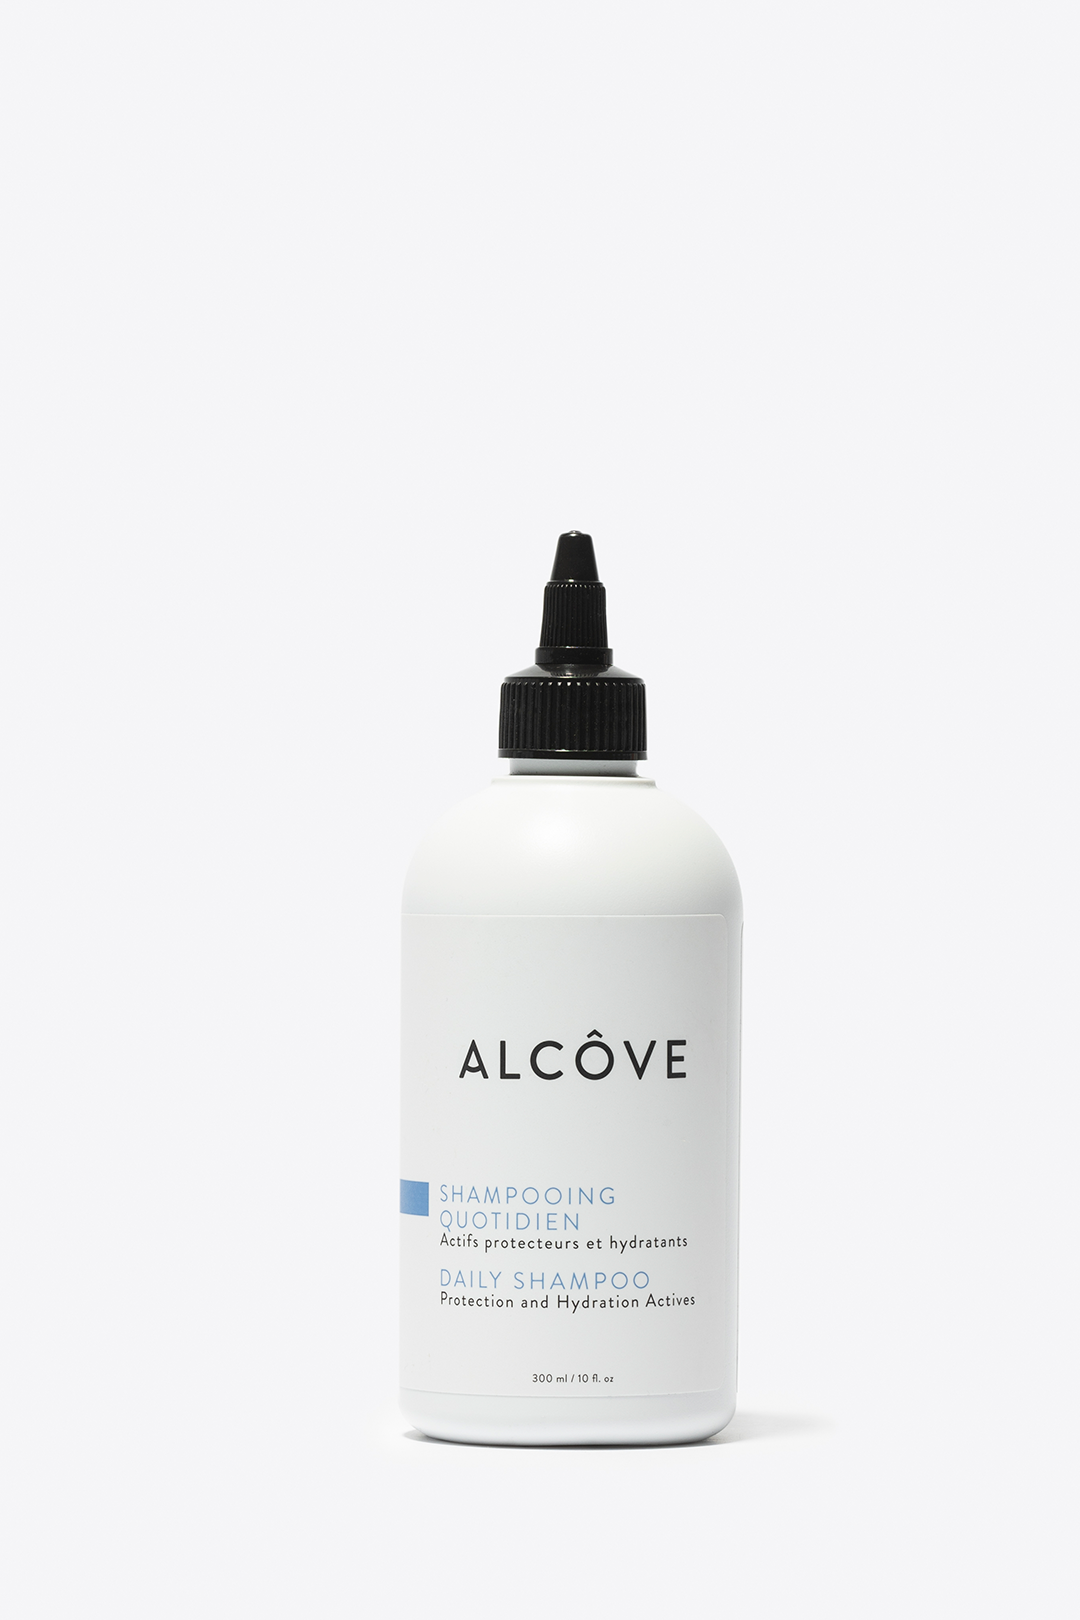 Alcove - DAILY SHAMPOO - by Alcove |ProCare Outlet|